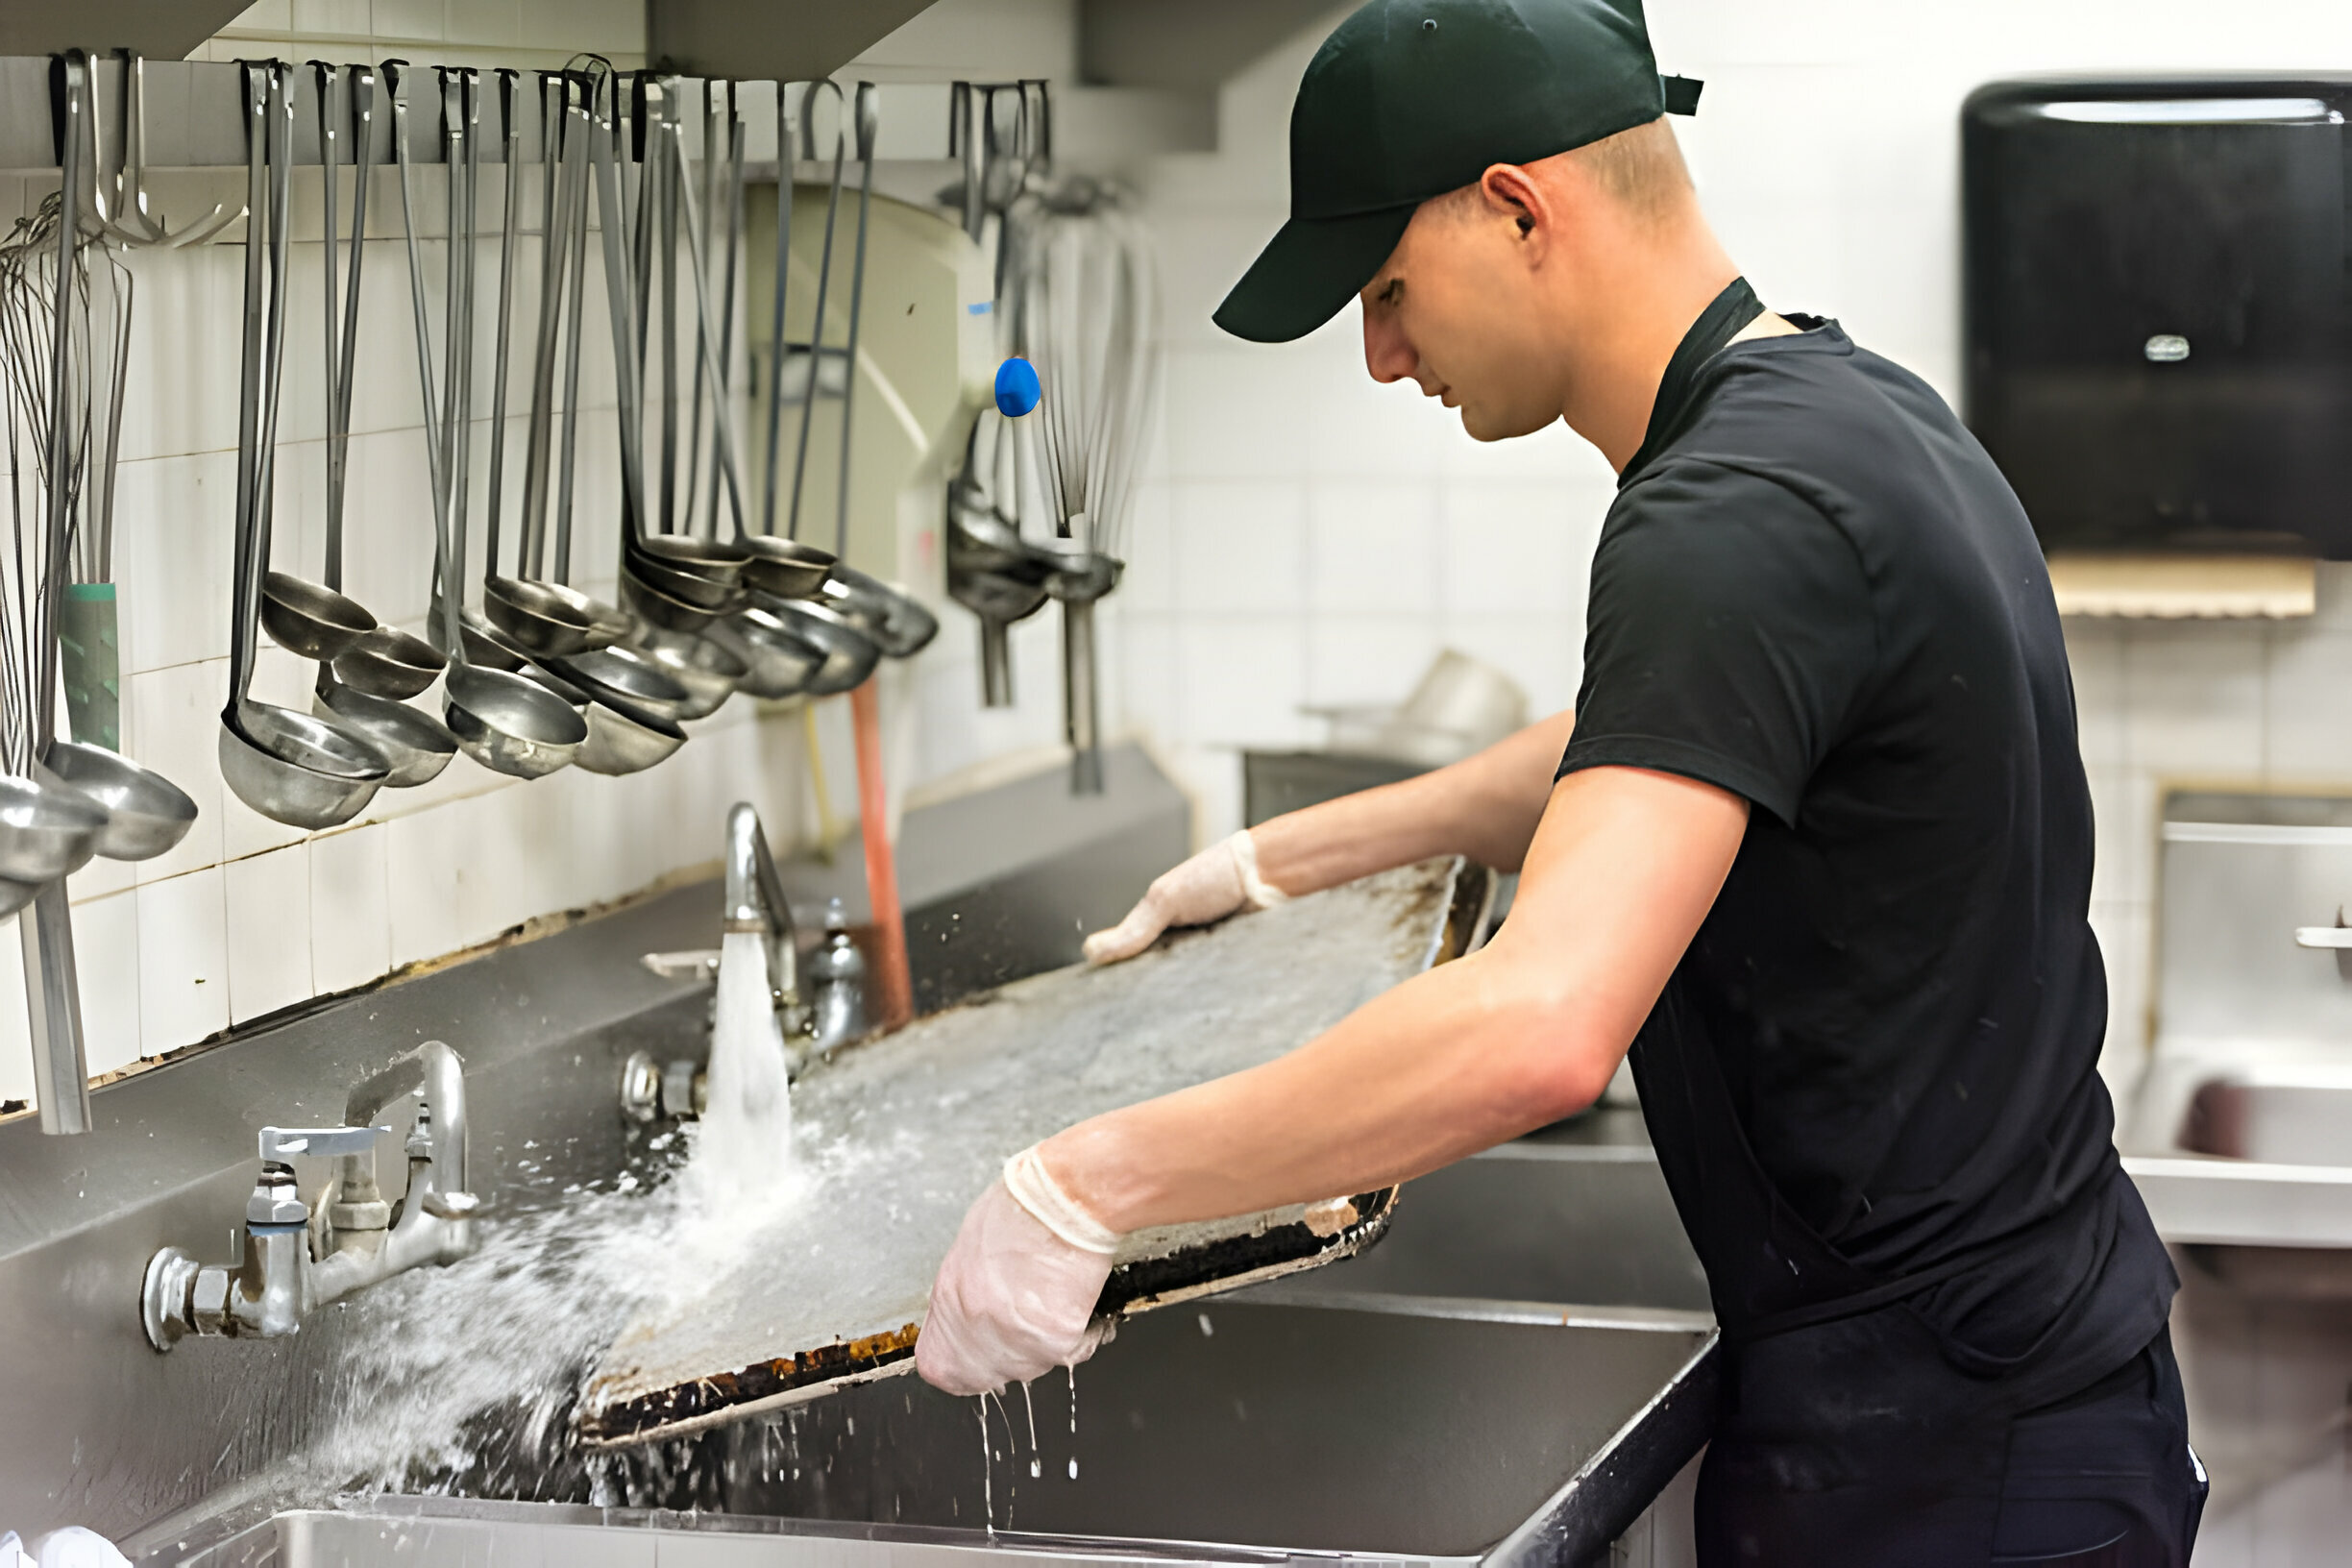 Multiple Opportunities for Dishwasher Jobs in Canada